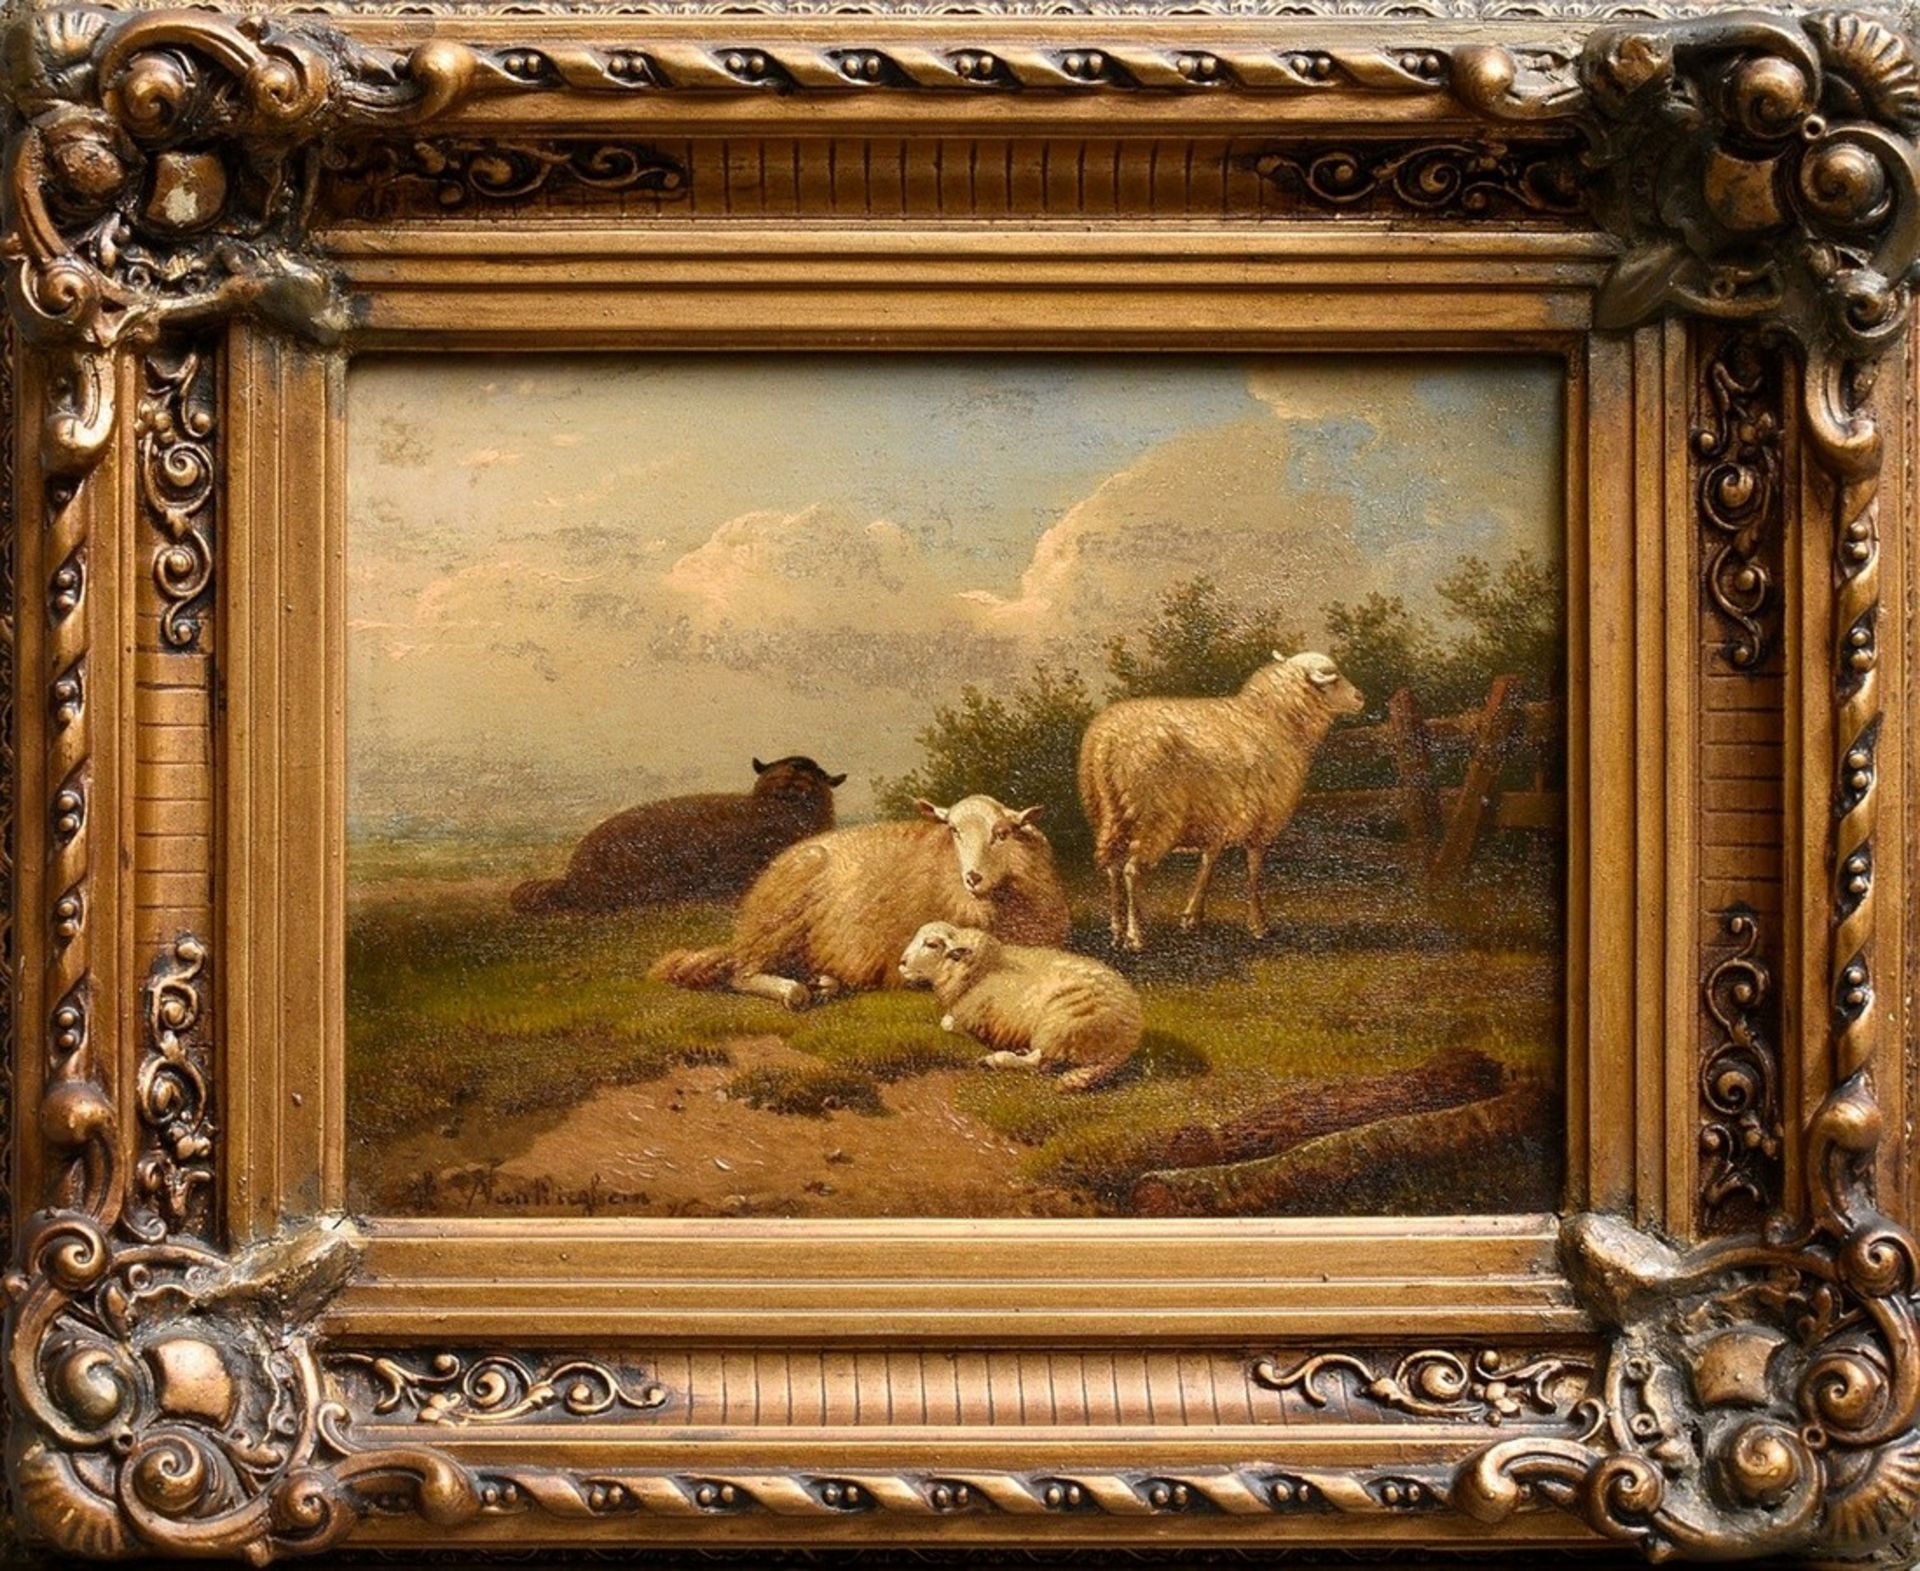 Dieghem, Joseph van (1843-1885) "Resting Sheep", oil/wood, magnificent frame (small defects), 23x16 - Image 2 of 5